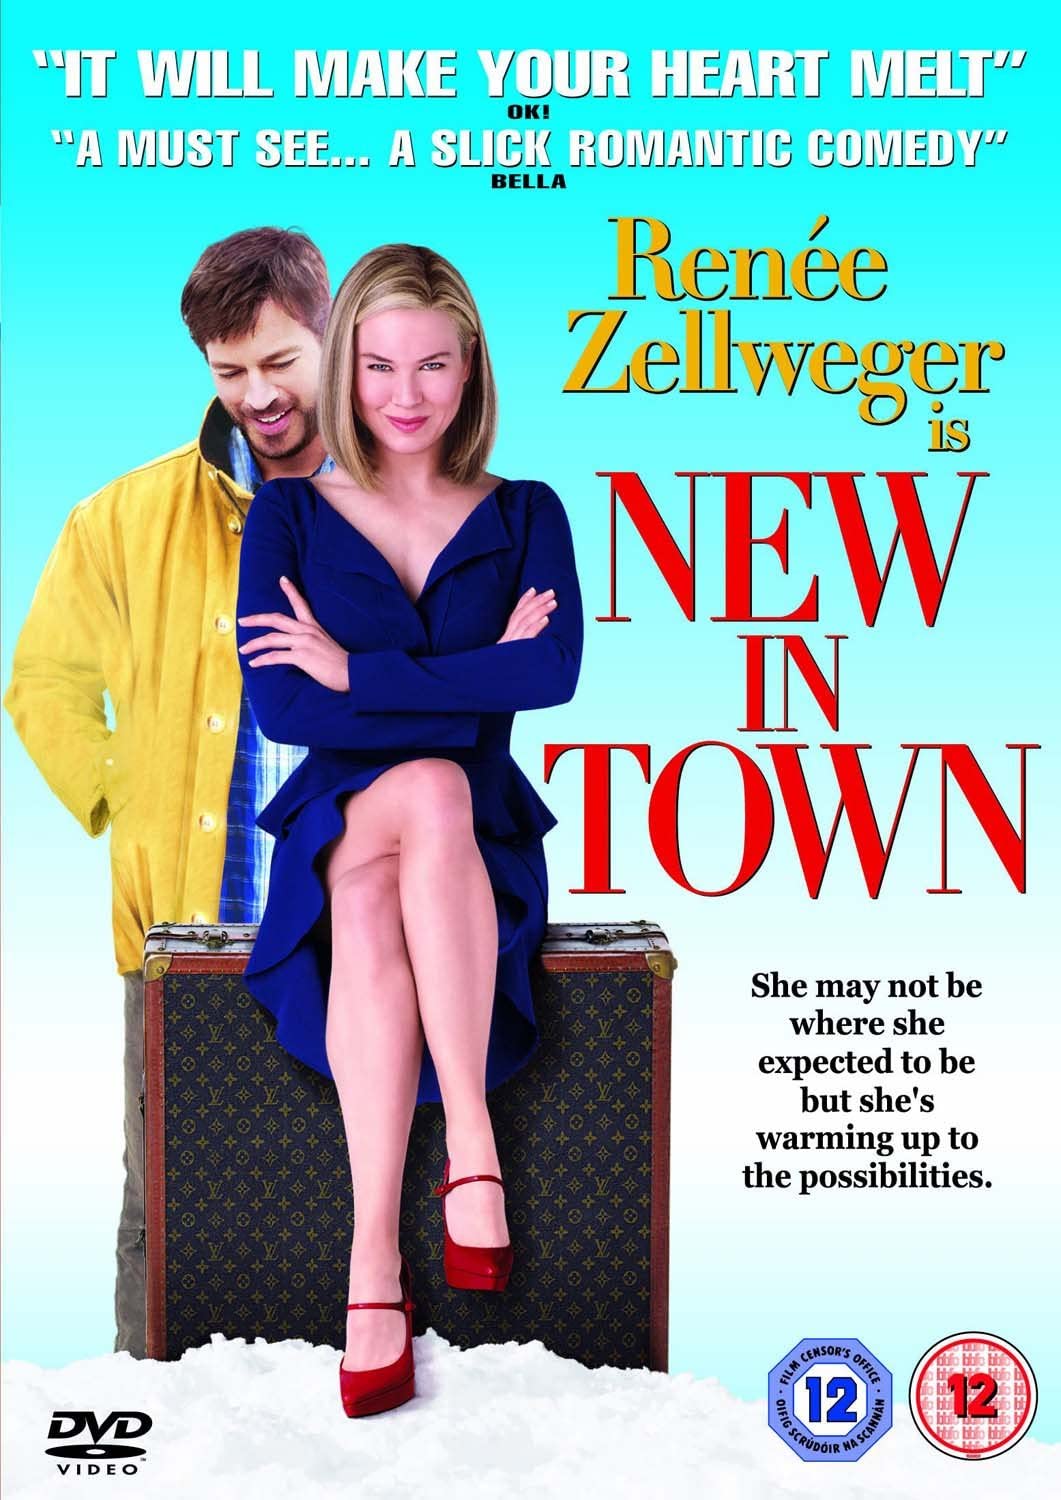 New In Town -Romance/Comedy [DVD]